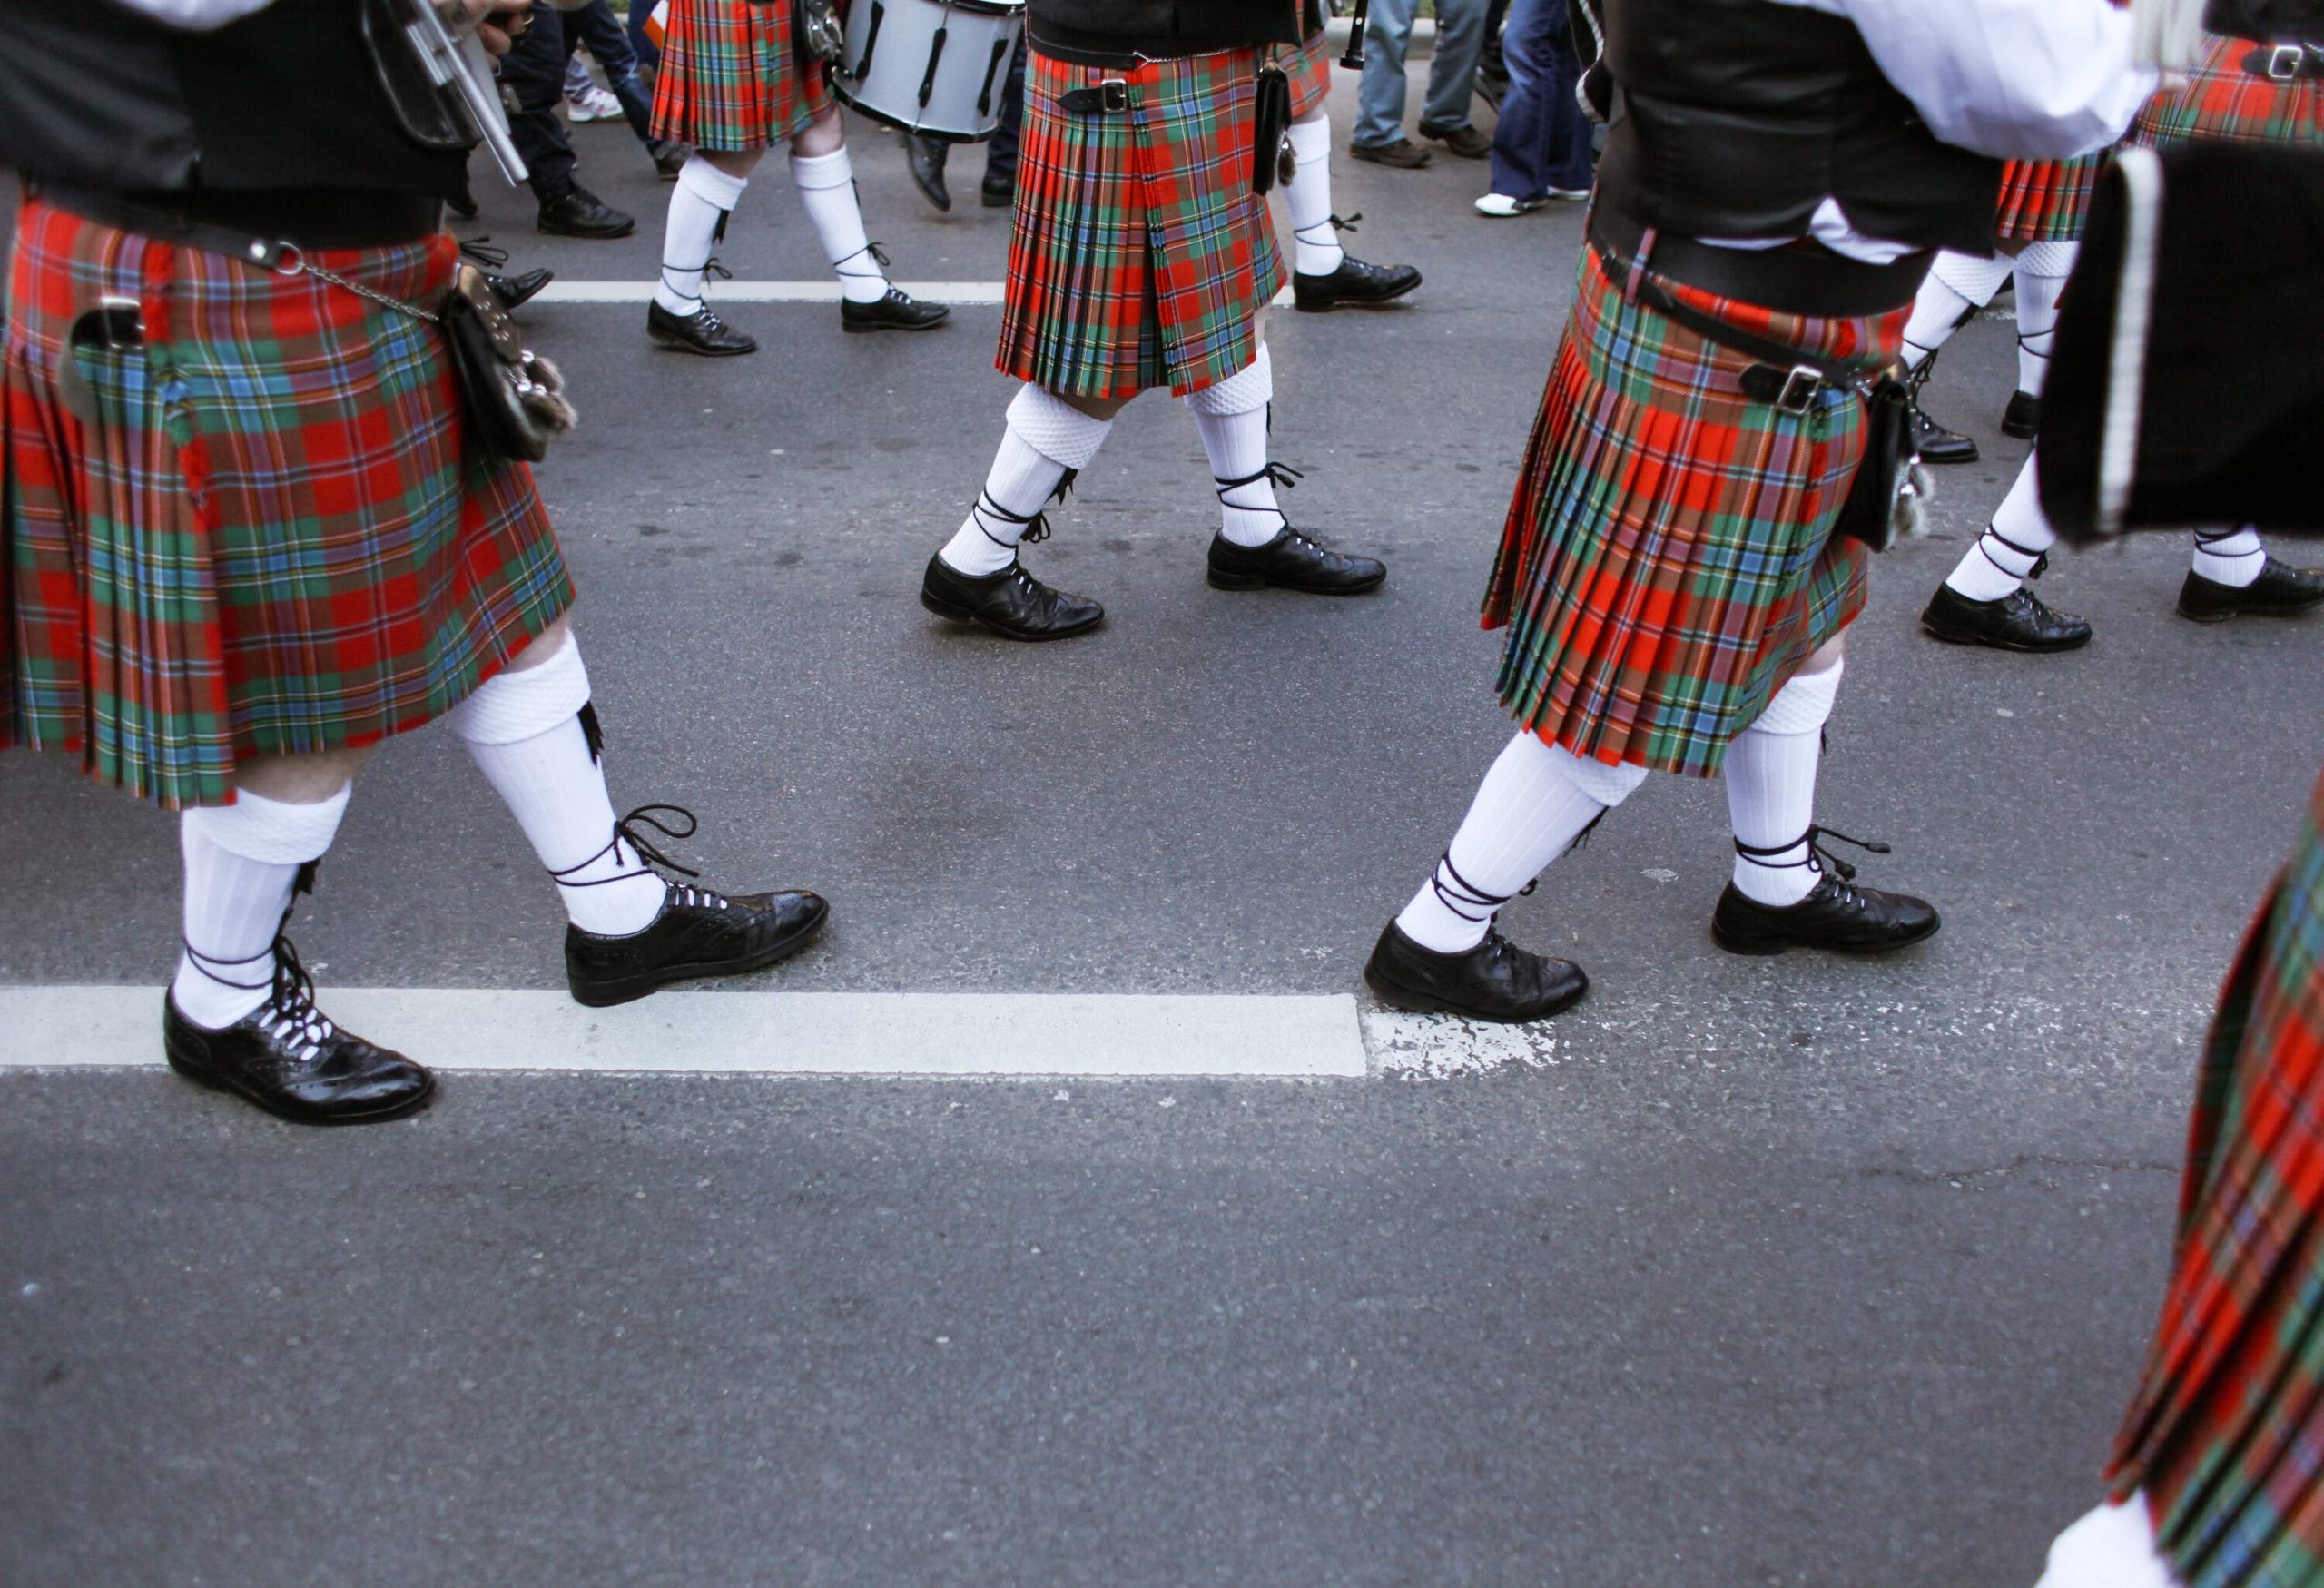 A parade of people on the street dressed in kilts.